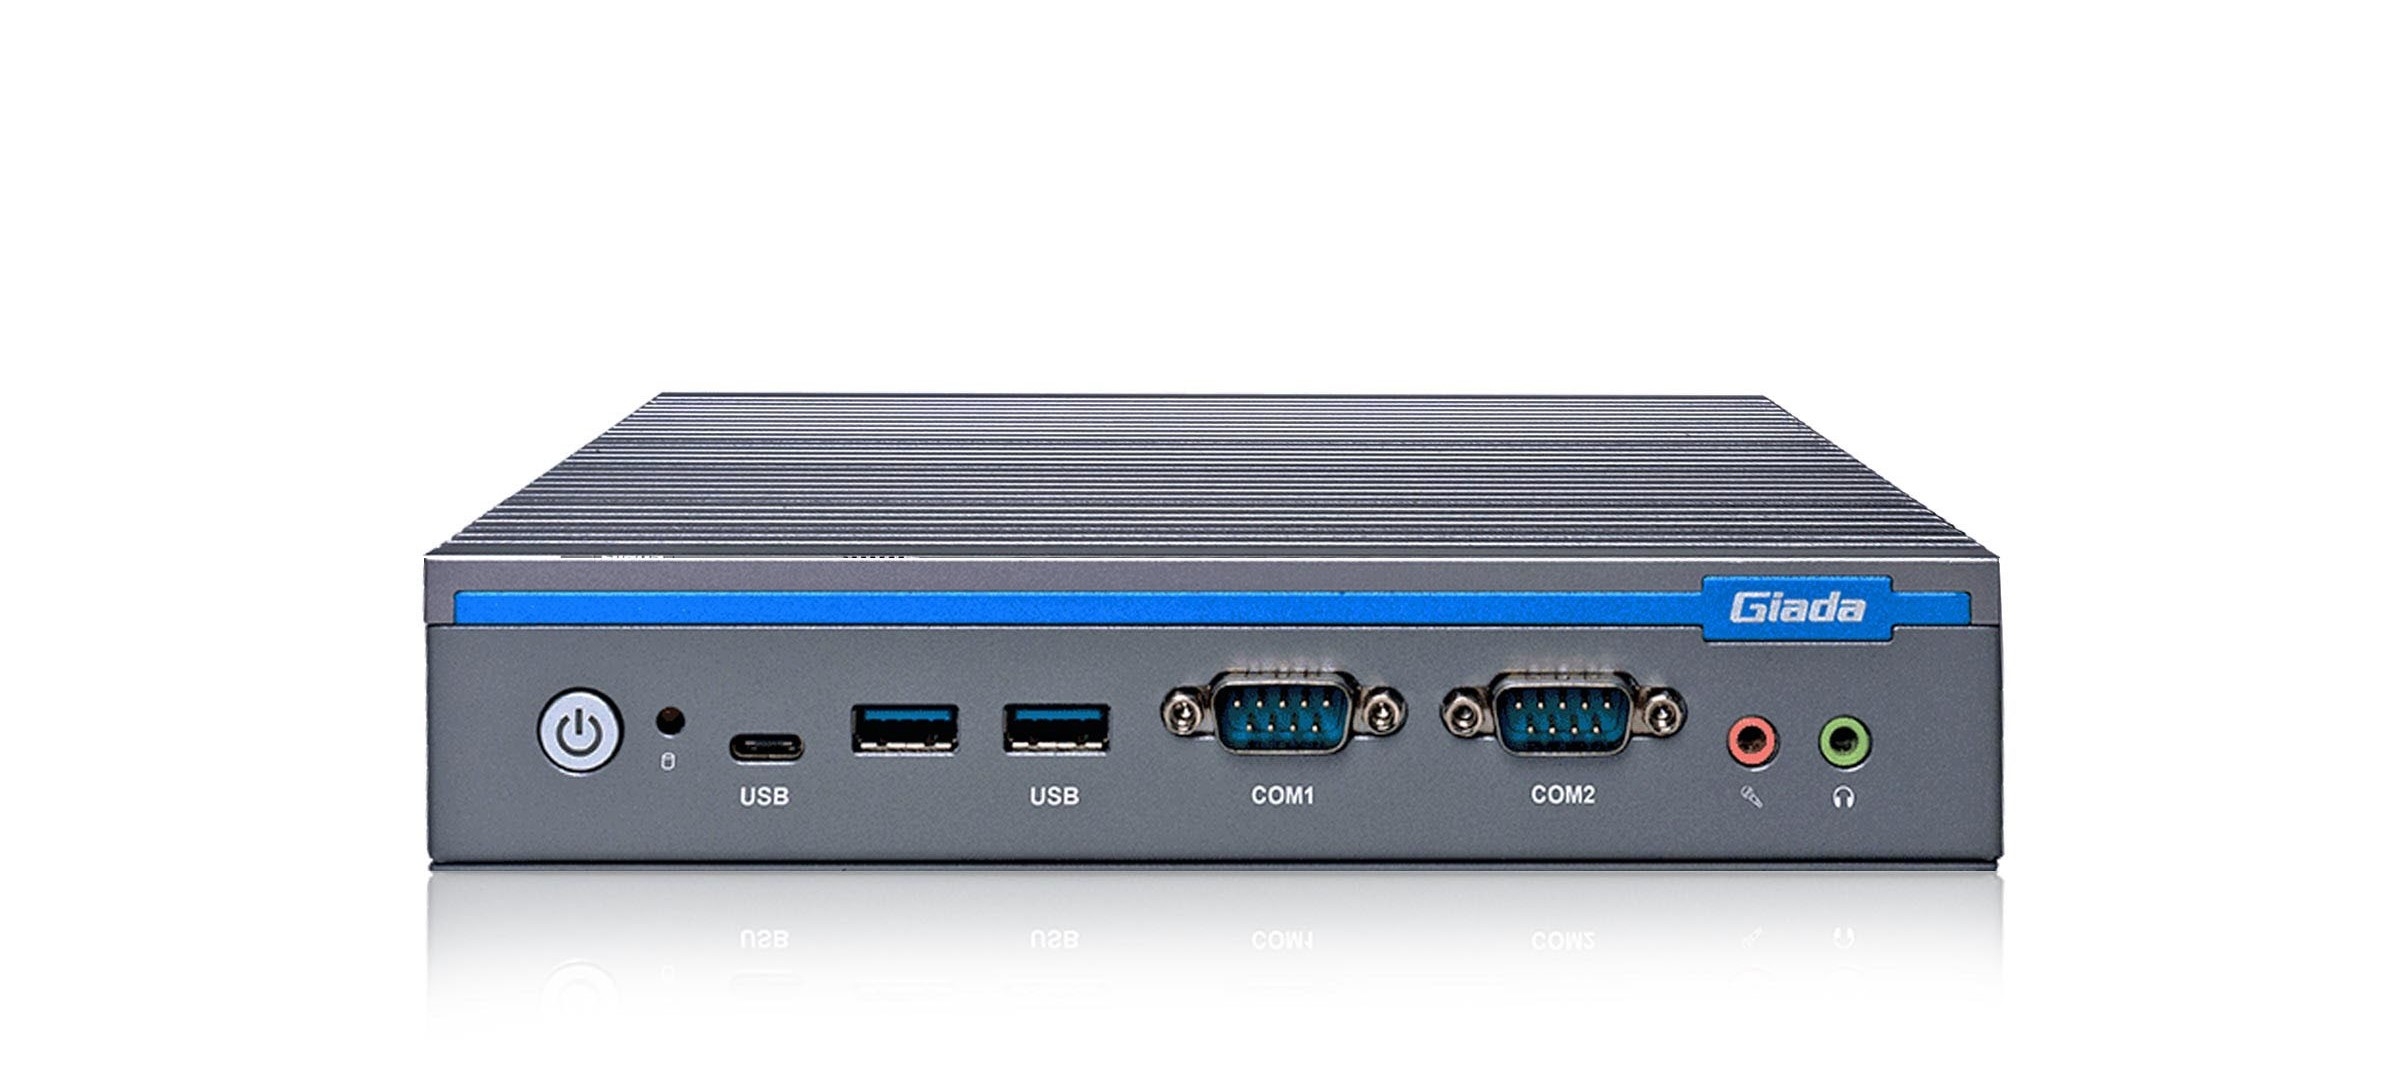 connectSignage\connectSchool coS-300F - Digital Signage Player